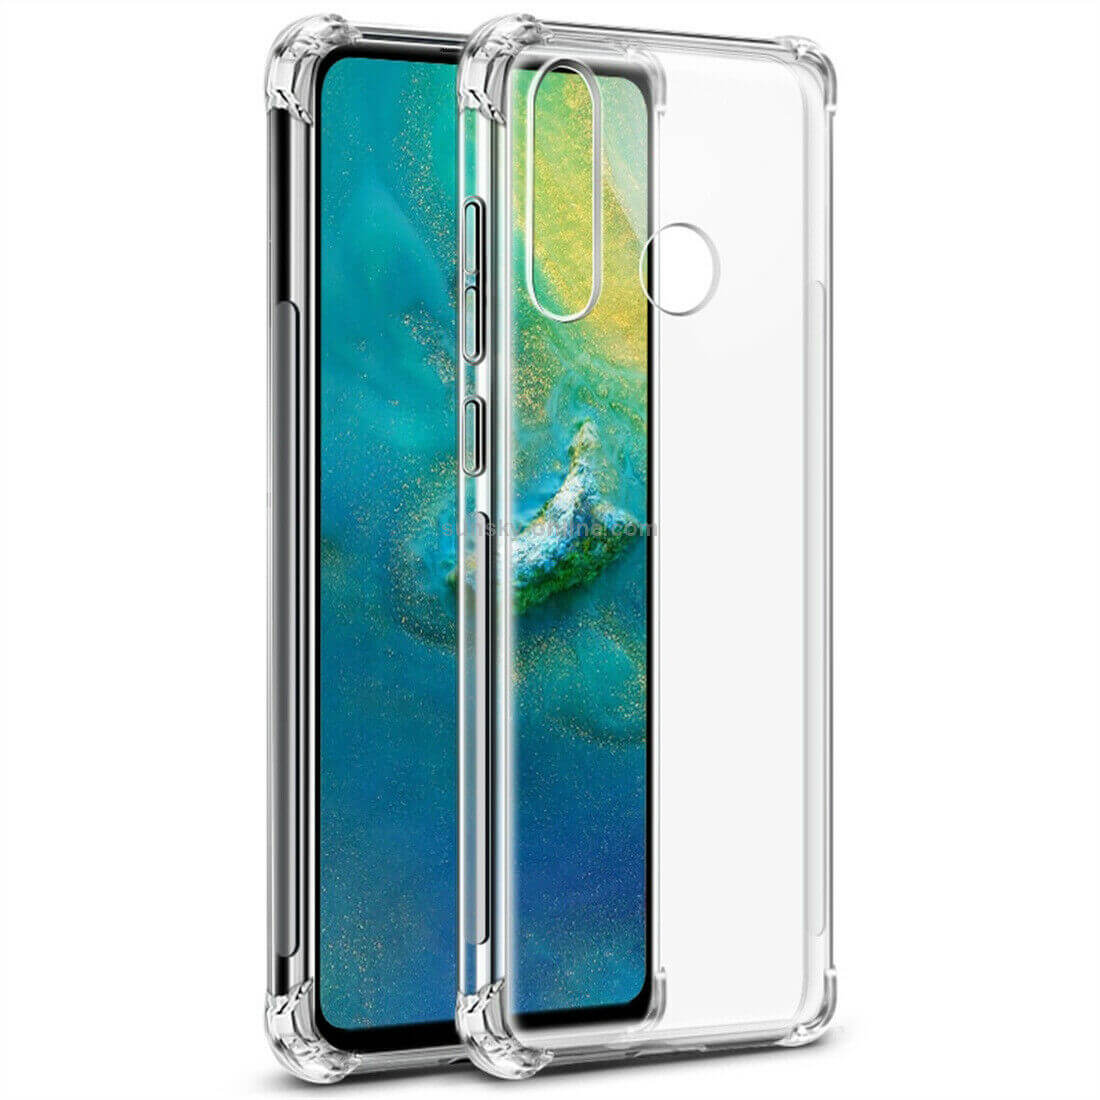 For Huawei P30 Lite Case Cover Clear ShockProof Soft TPU Silicone